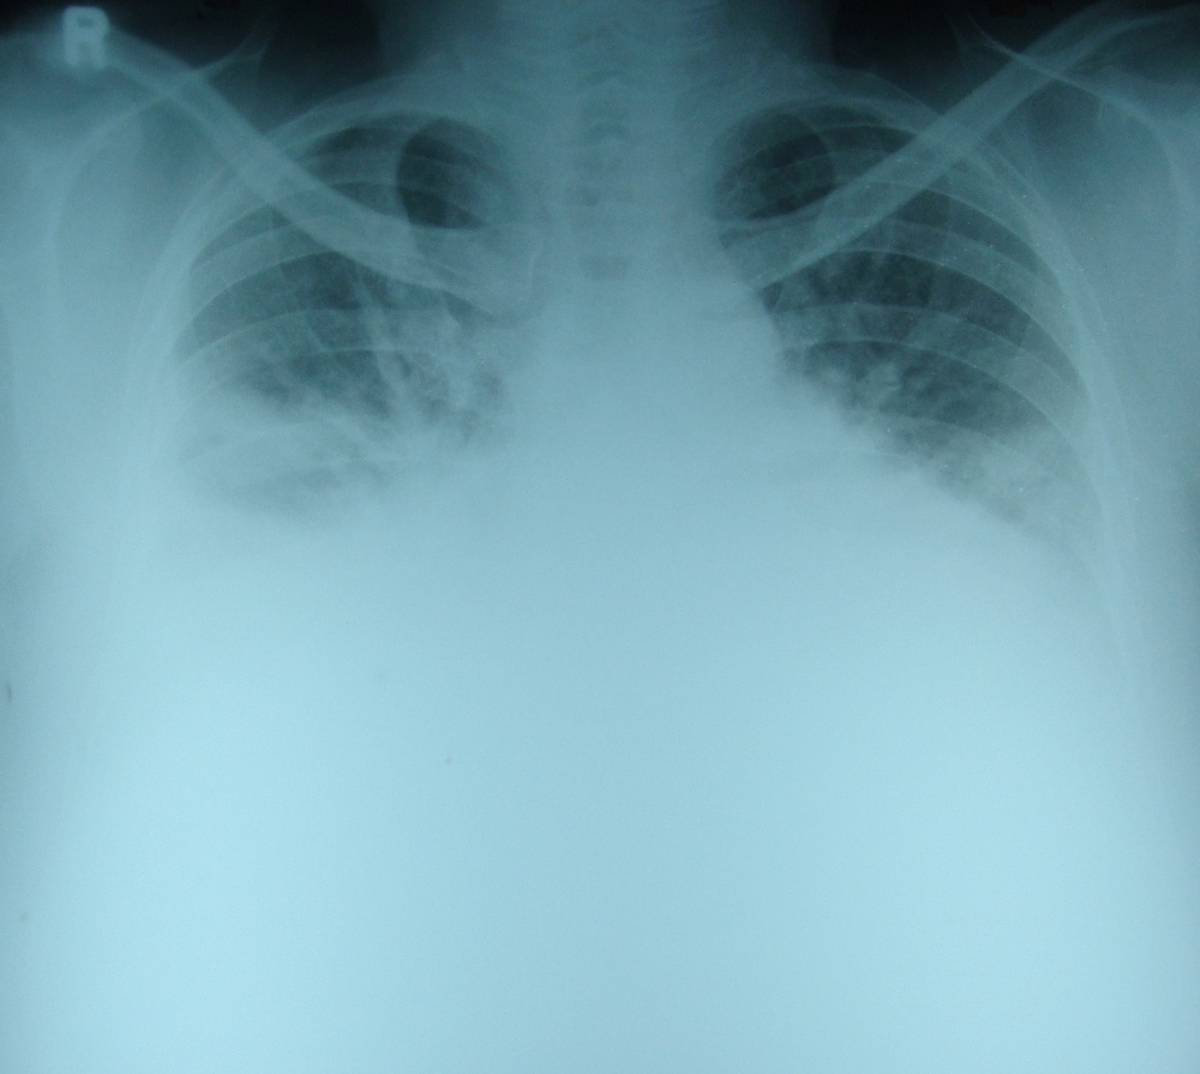 X-ray chest PA view in heart failure with bilateral pleural effusion